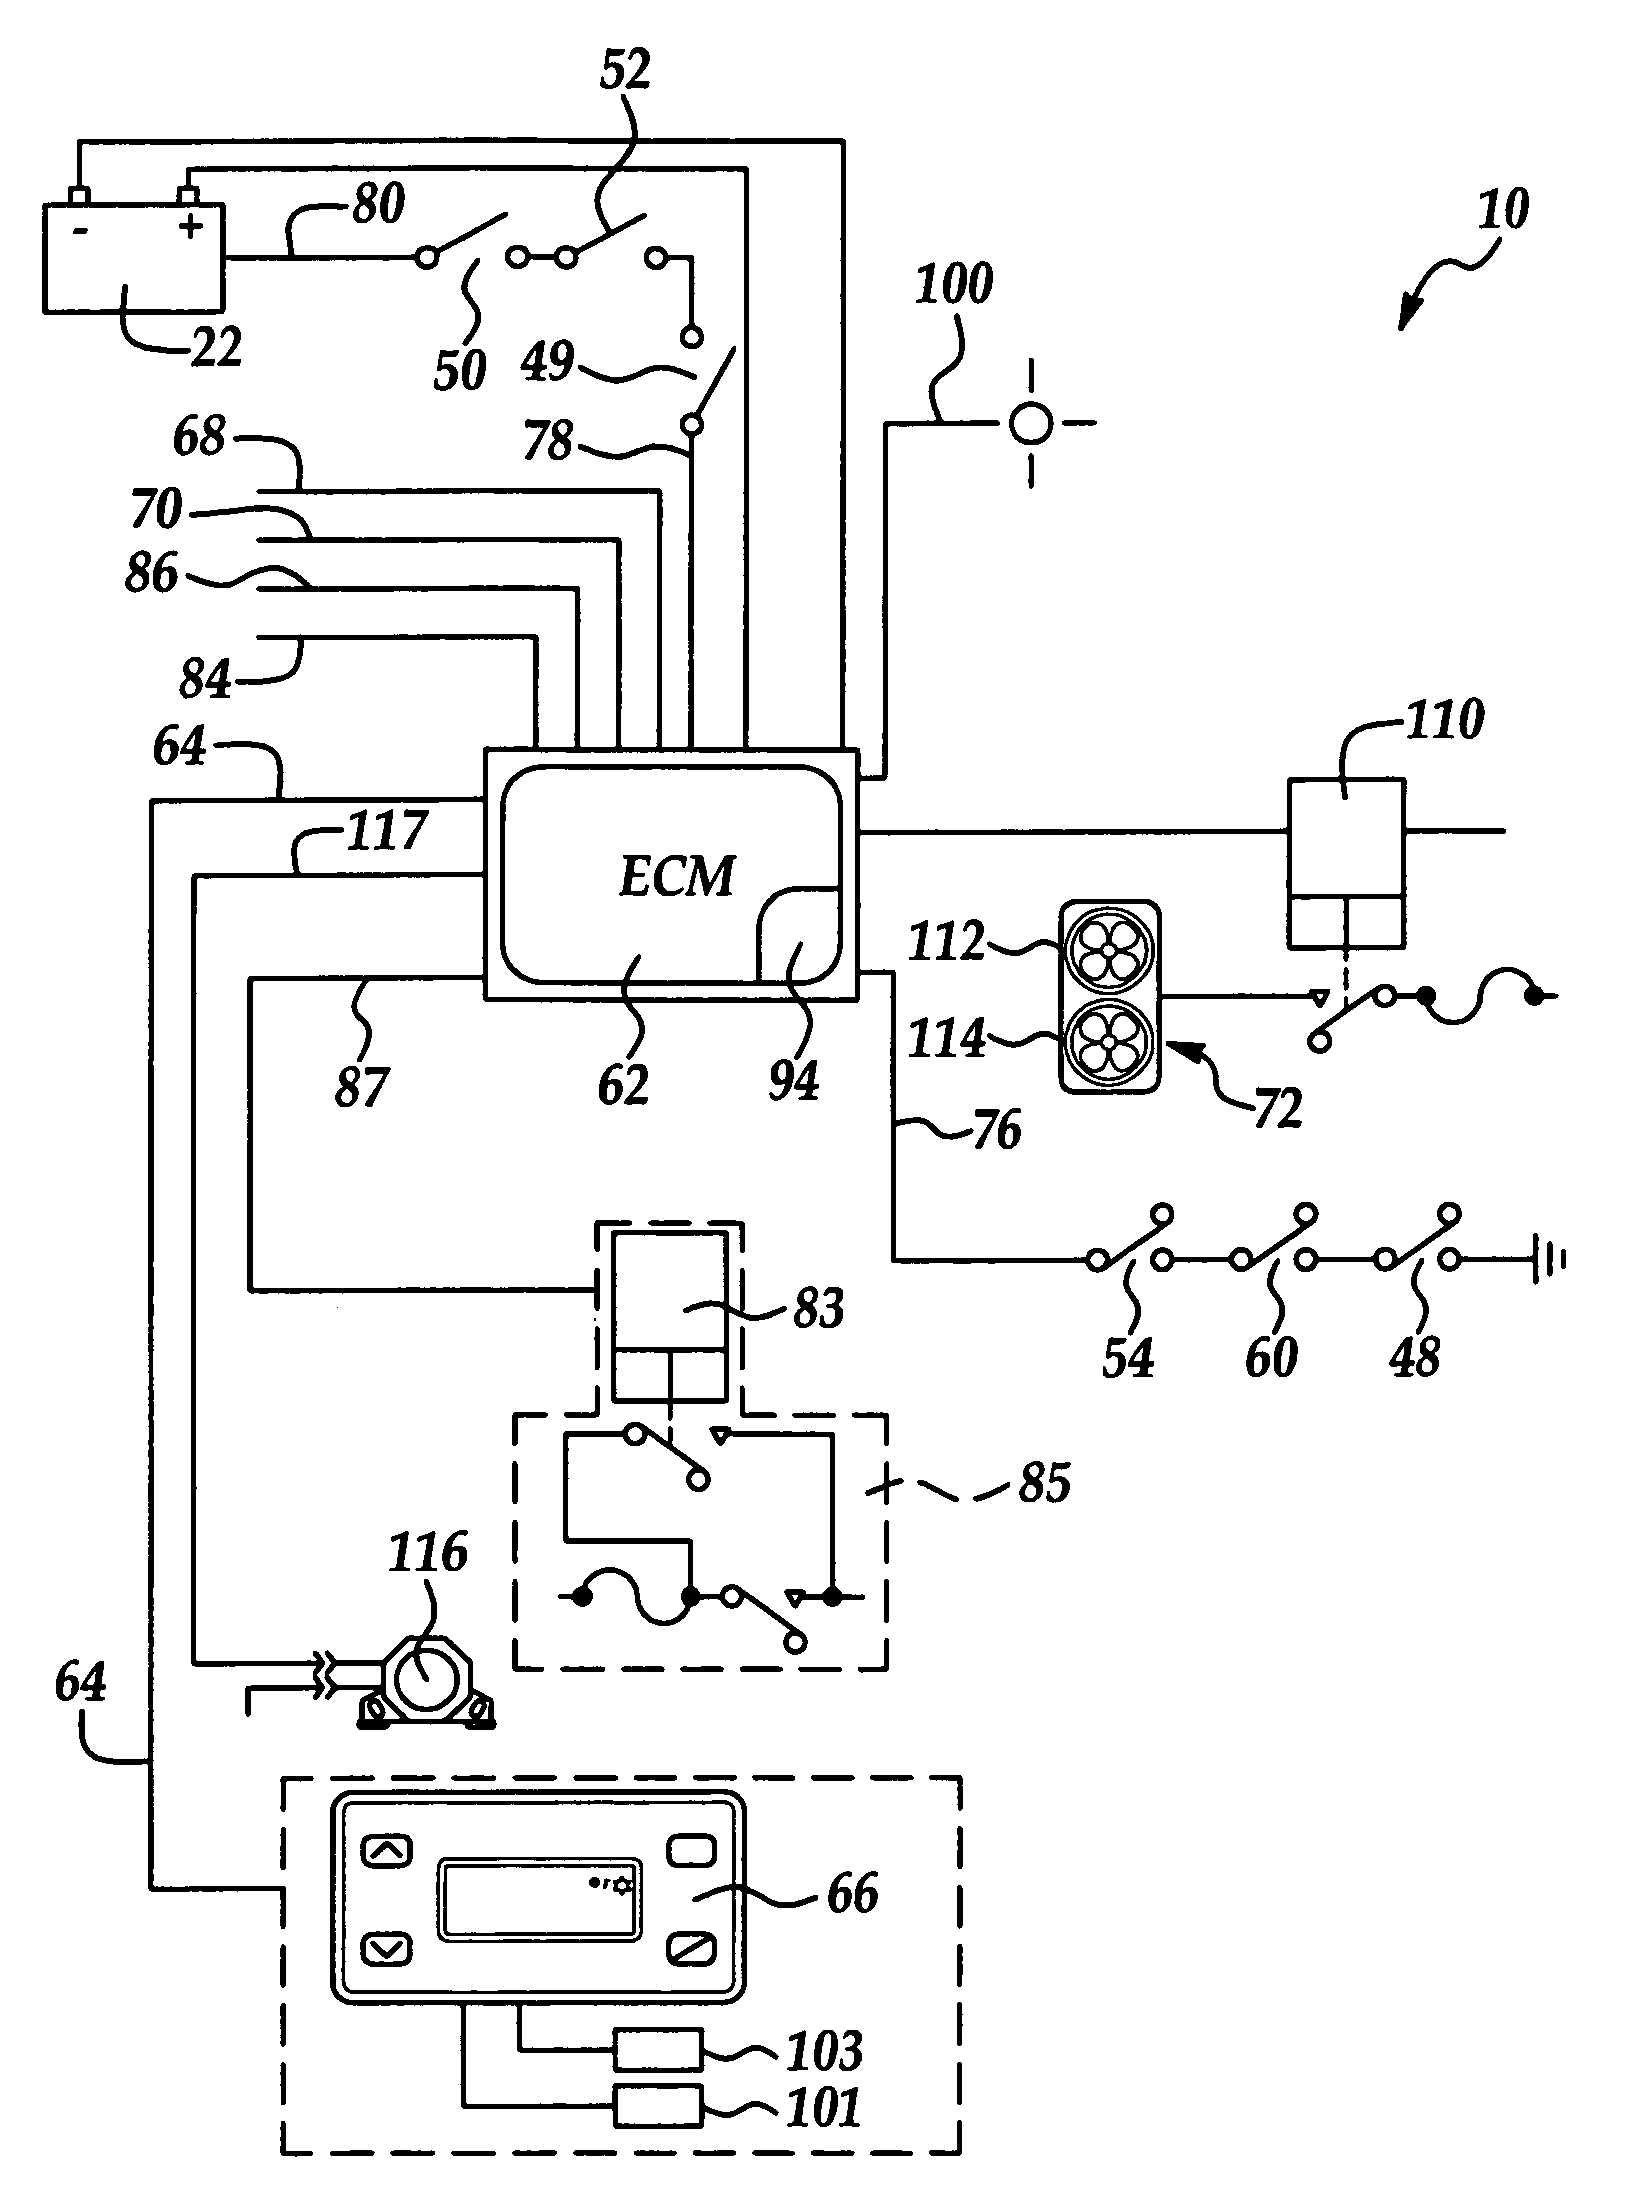 Engine control system and method of automatic starting and stopping a combustion engine